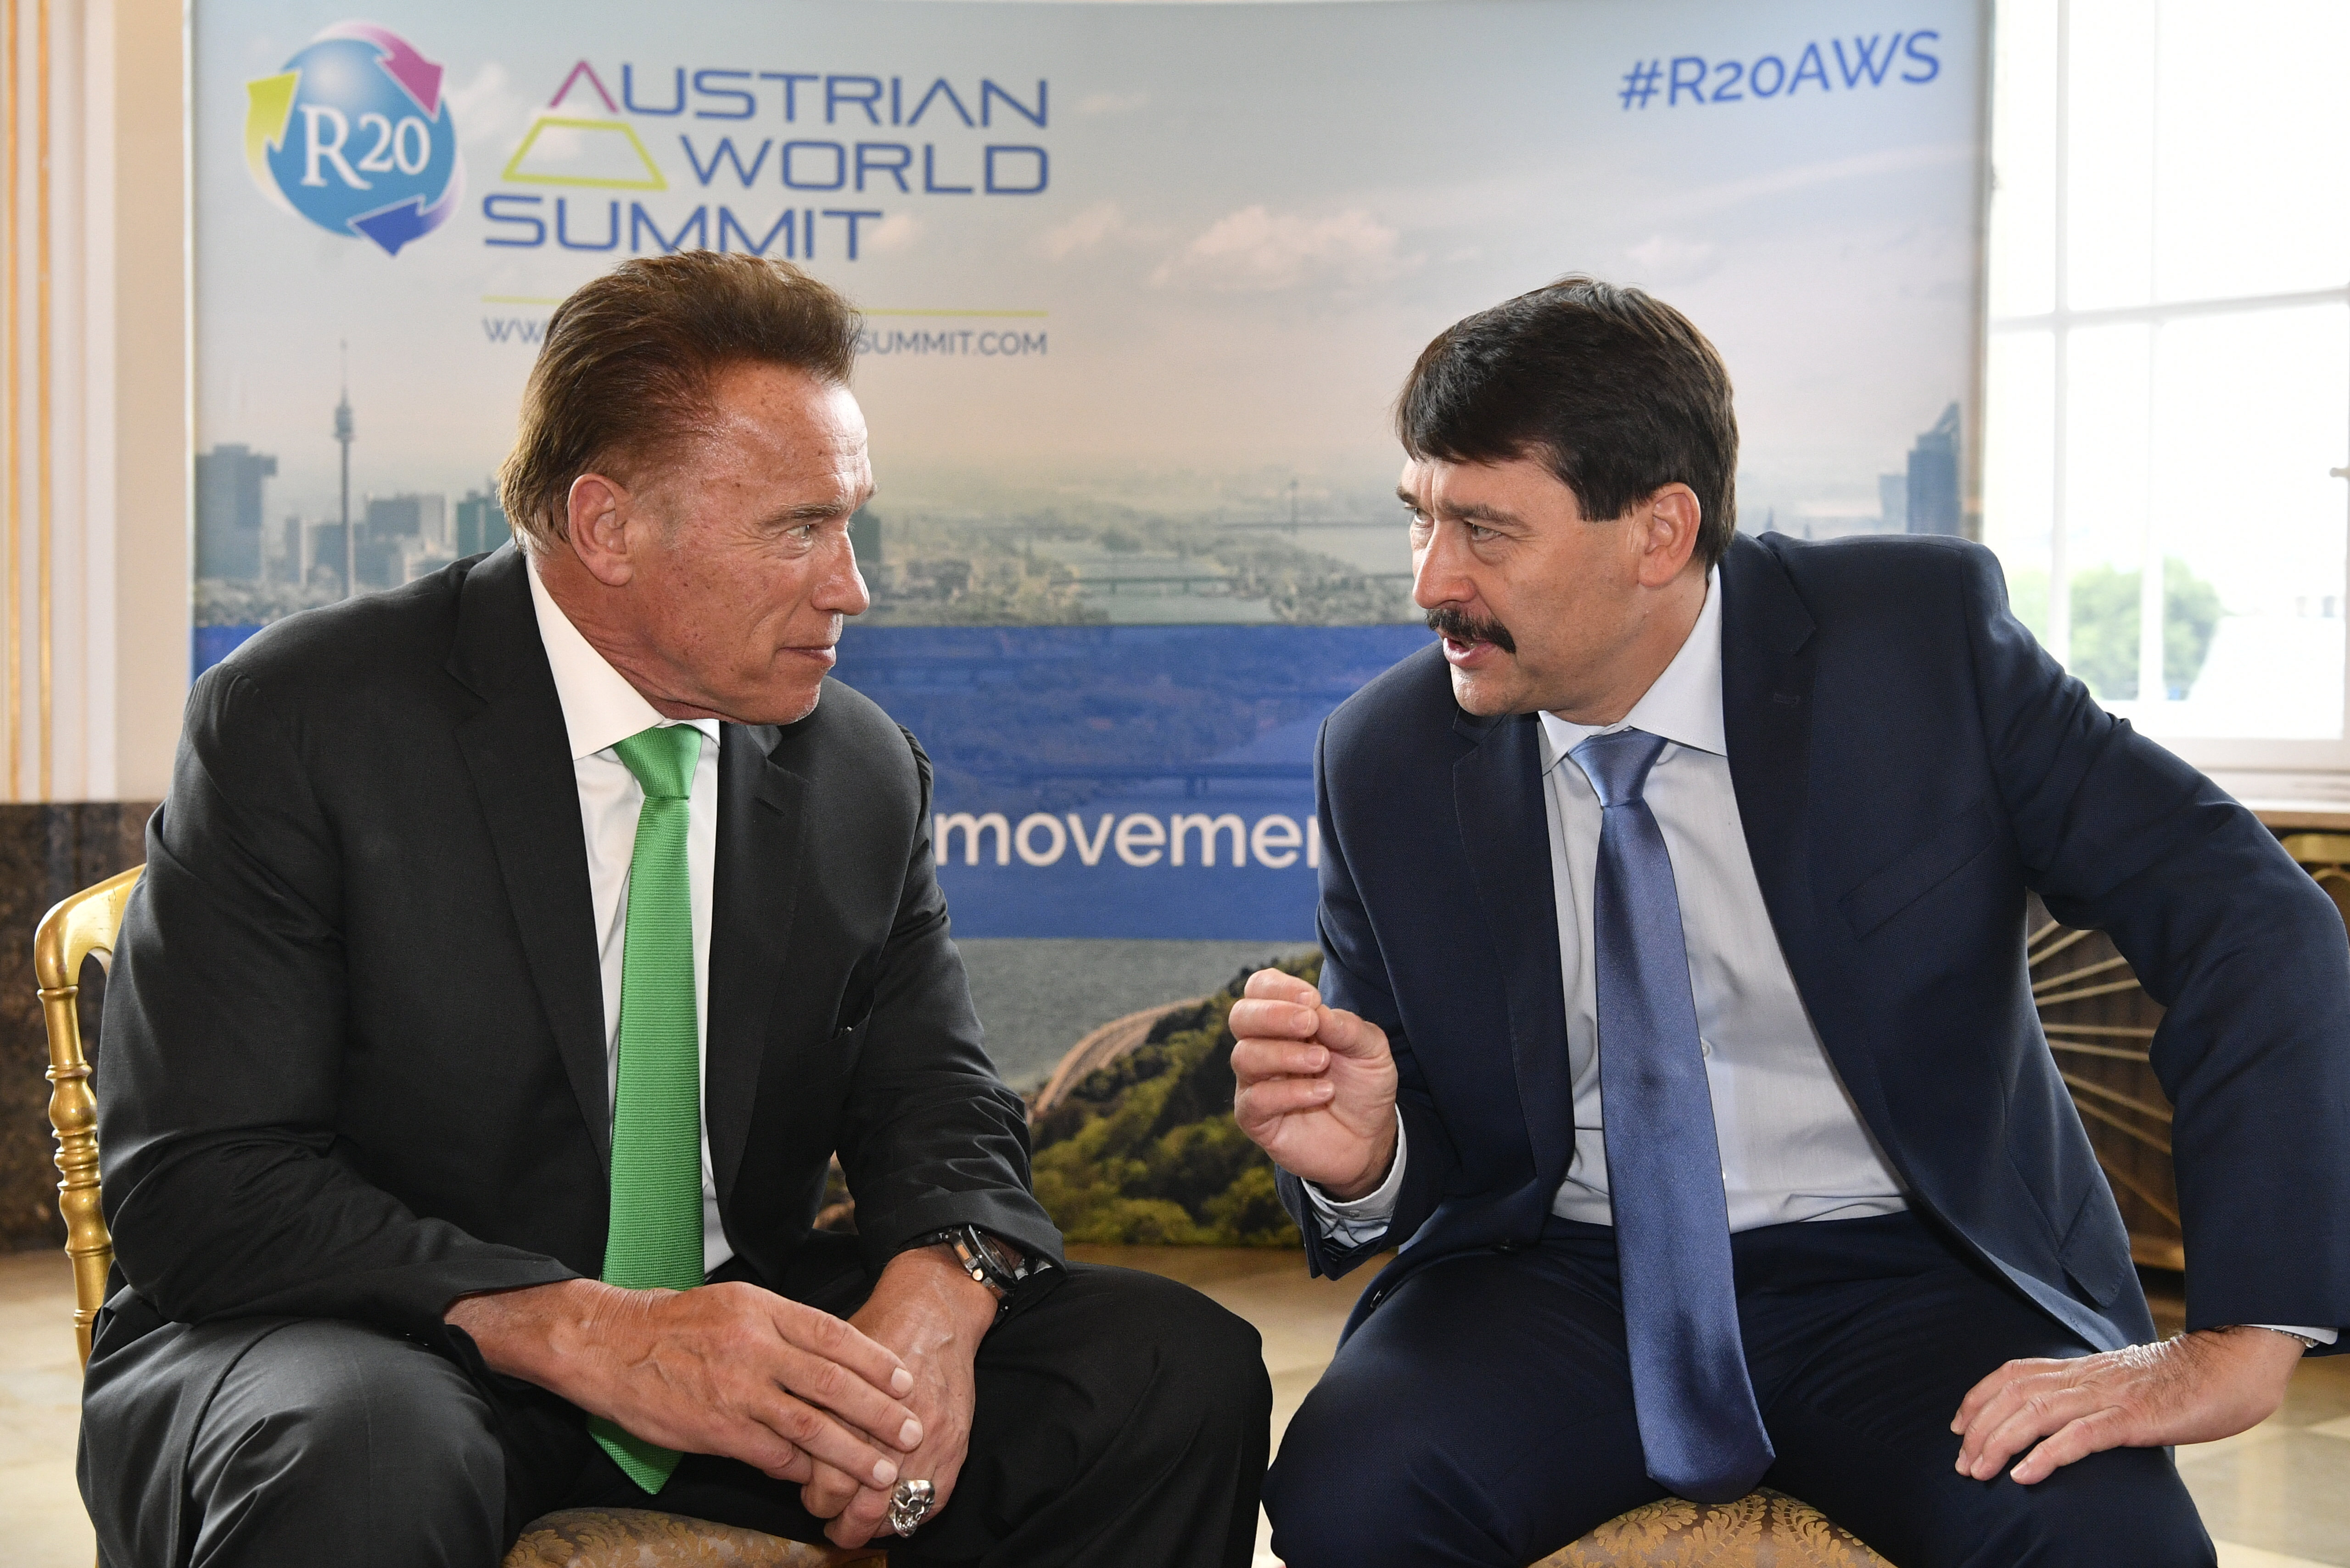 R20 Austrian World Summit - President Áder Hungary's fight against climate change yields results